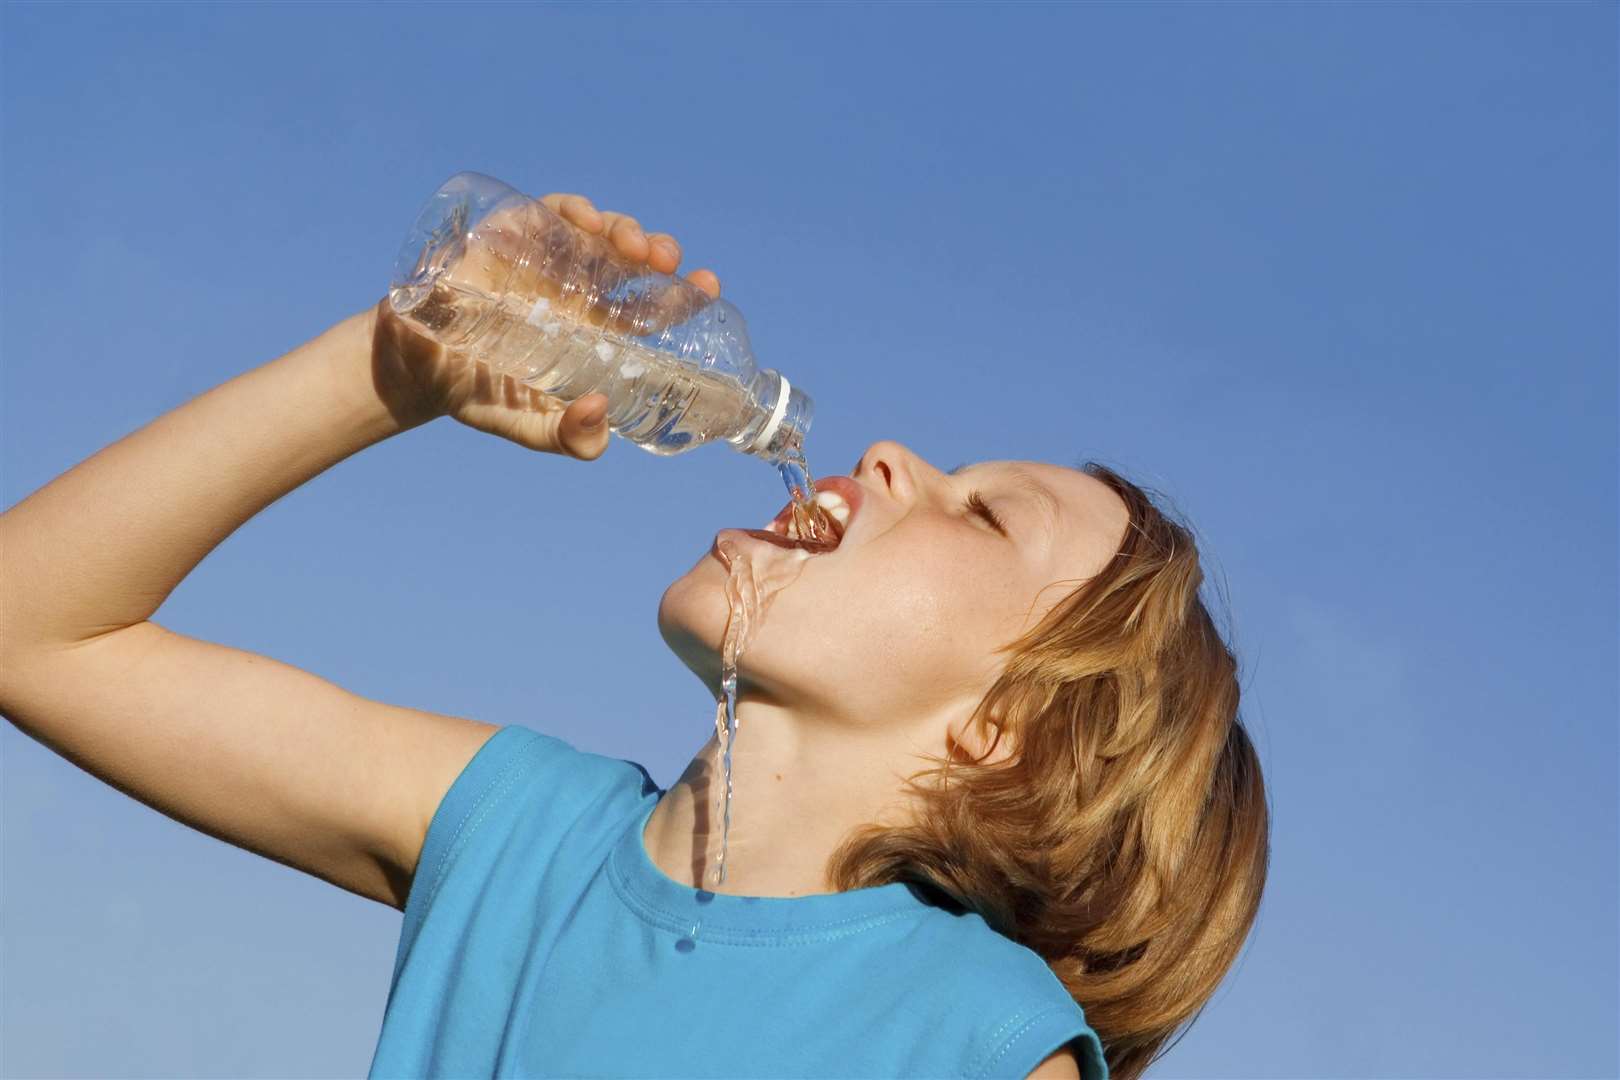 Drink plenty of water as the temperatures soar. Stock image